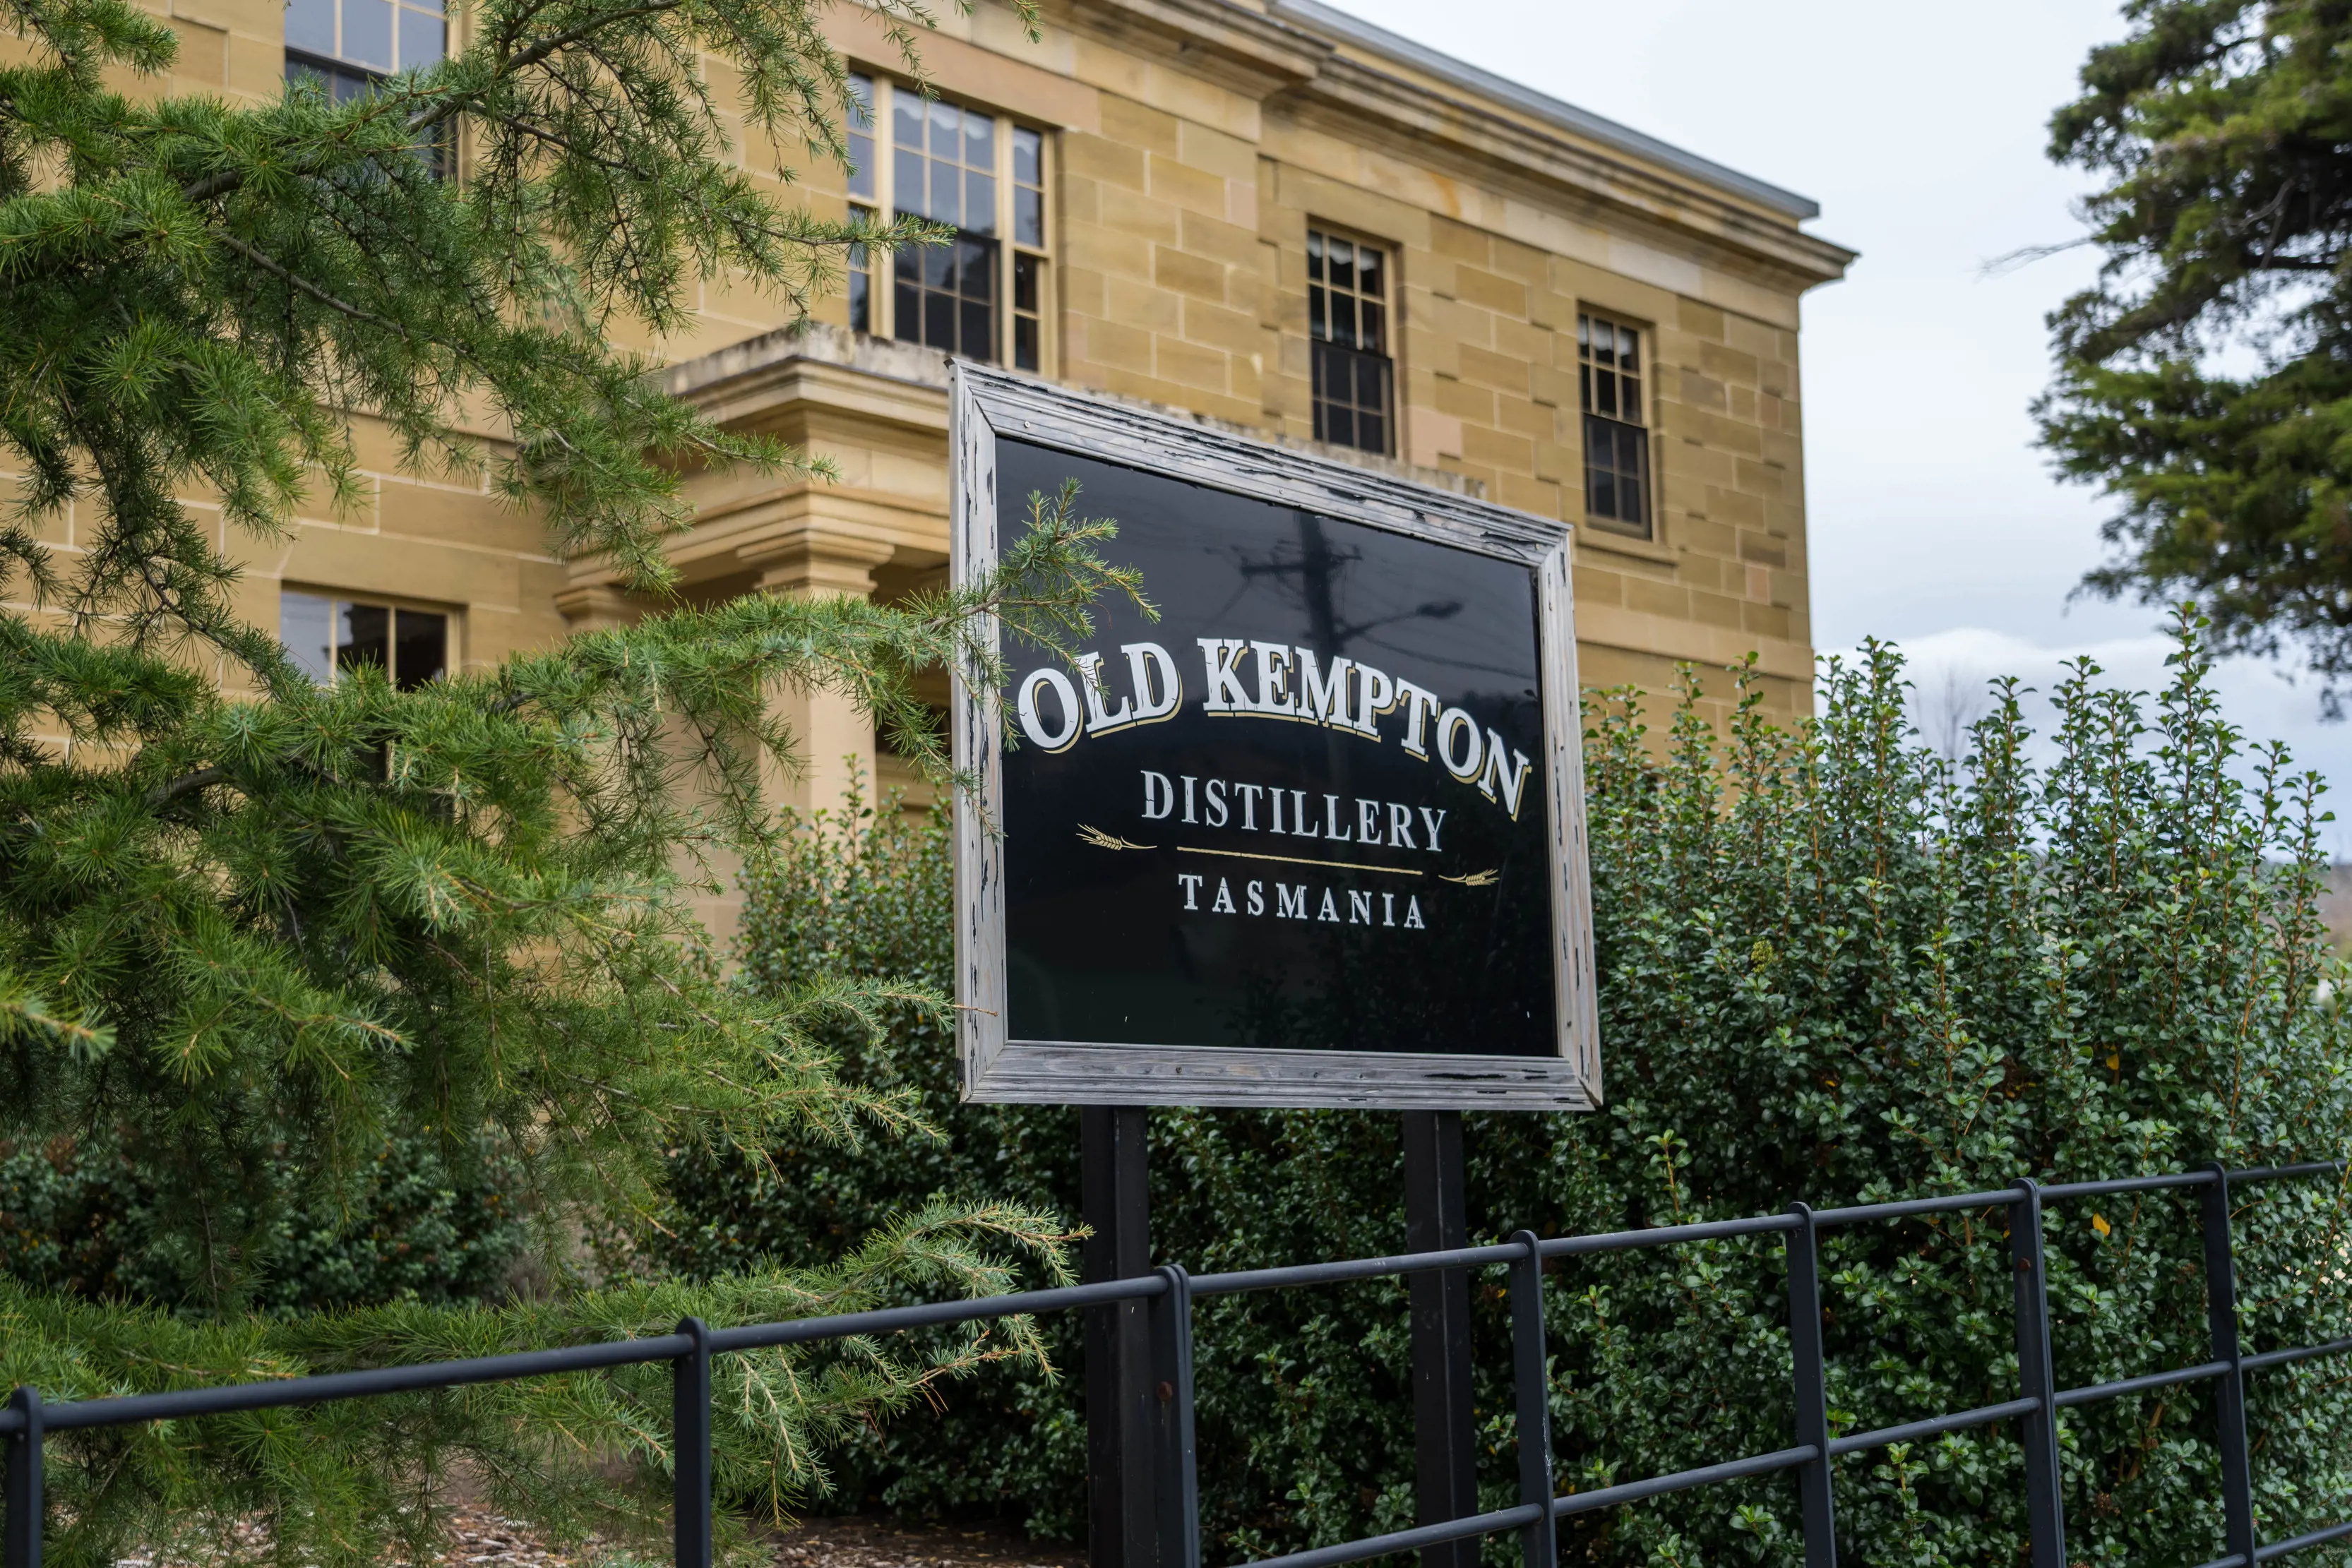 Image of the sign and outside the Old Kempton Distillery, located in Dysart House. Lush green trees surround the building.